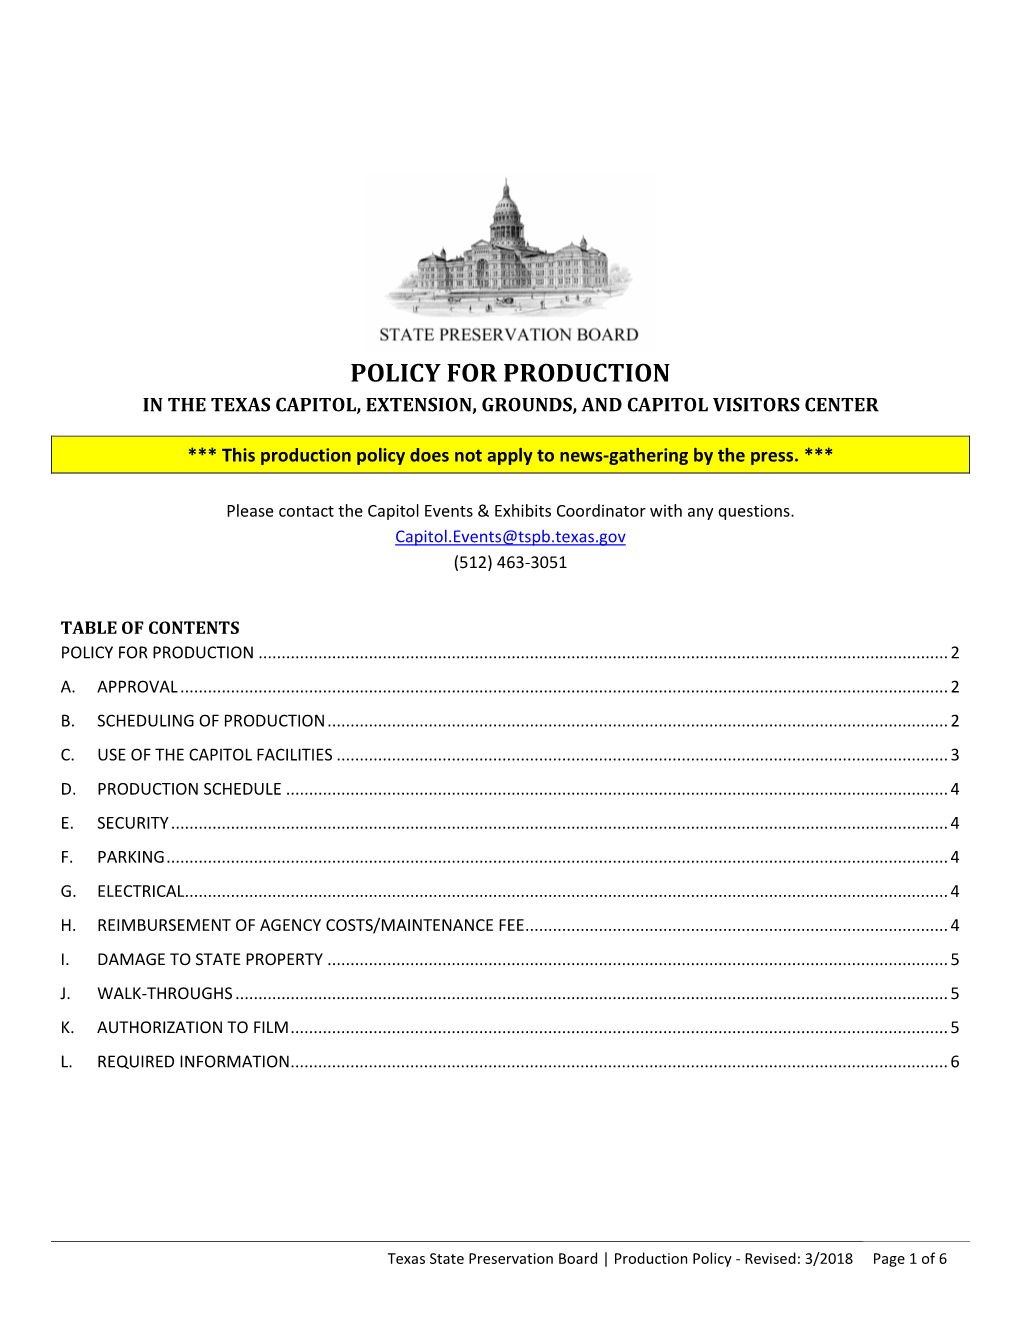 Texas Capitol Production Policy